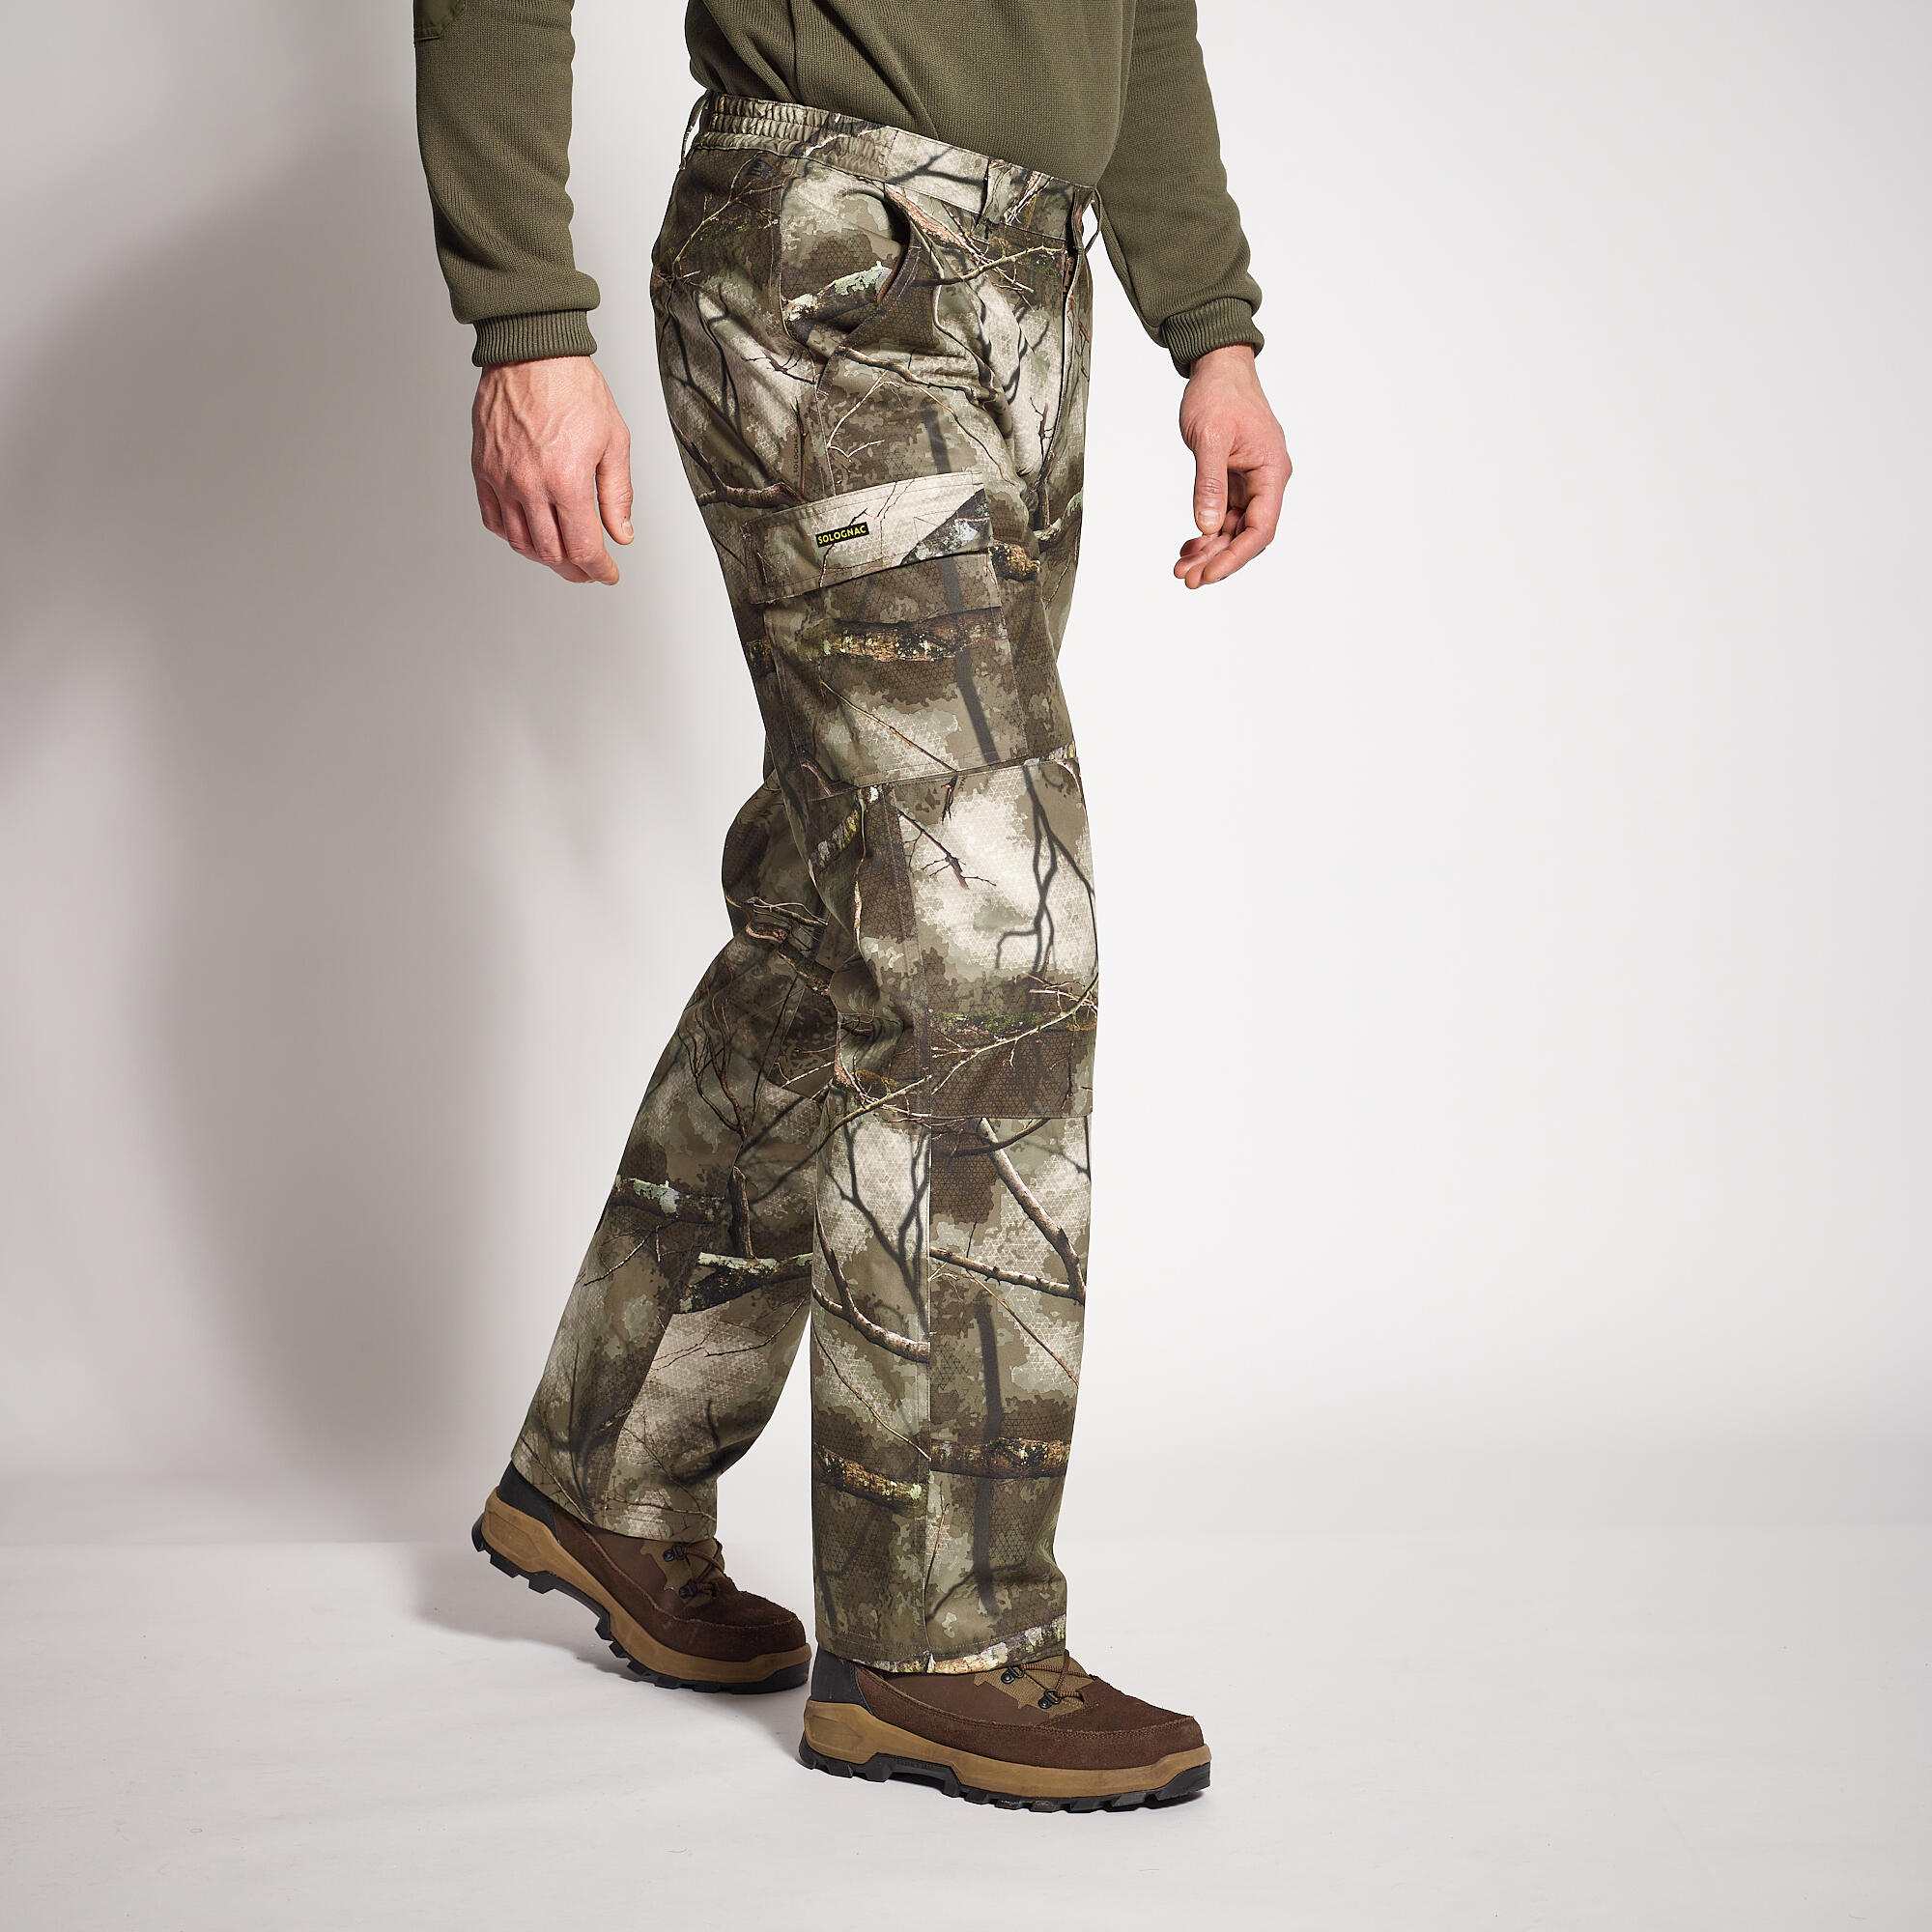 Game Technical Apparel Mens EN302 Stealth TeclWood Camouflage Waterproof  Hunting Trousers 30 Hunters Green  Amazoncouk Fashion